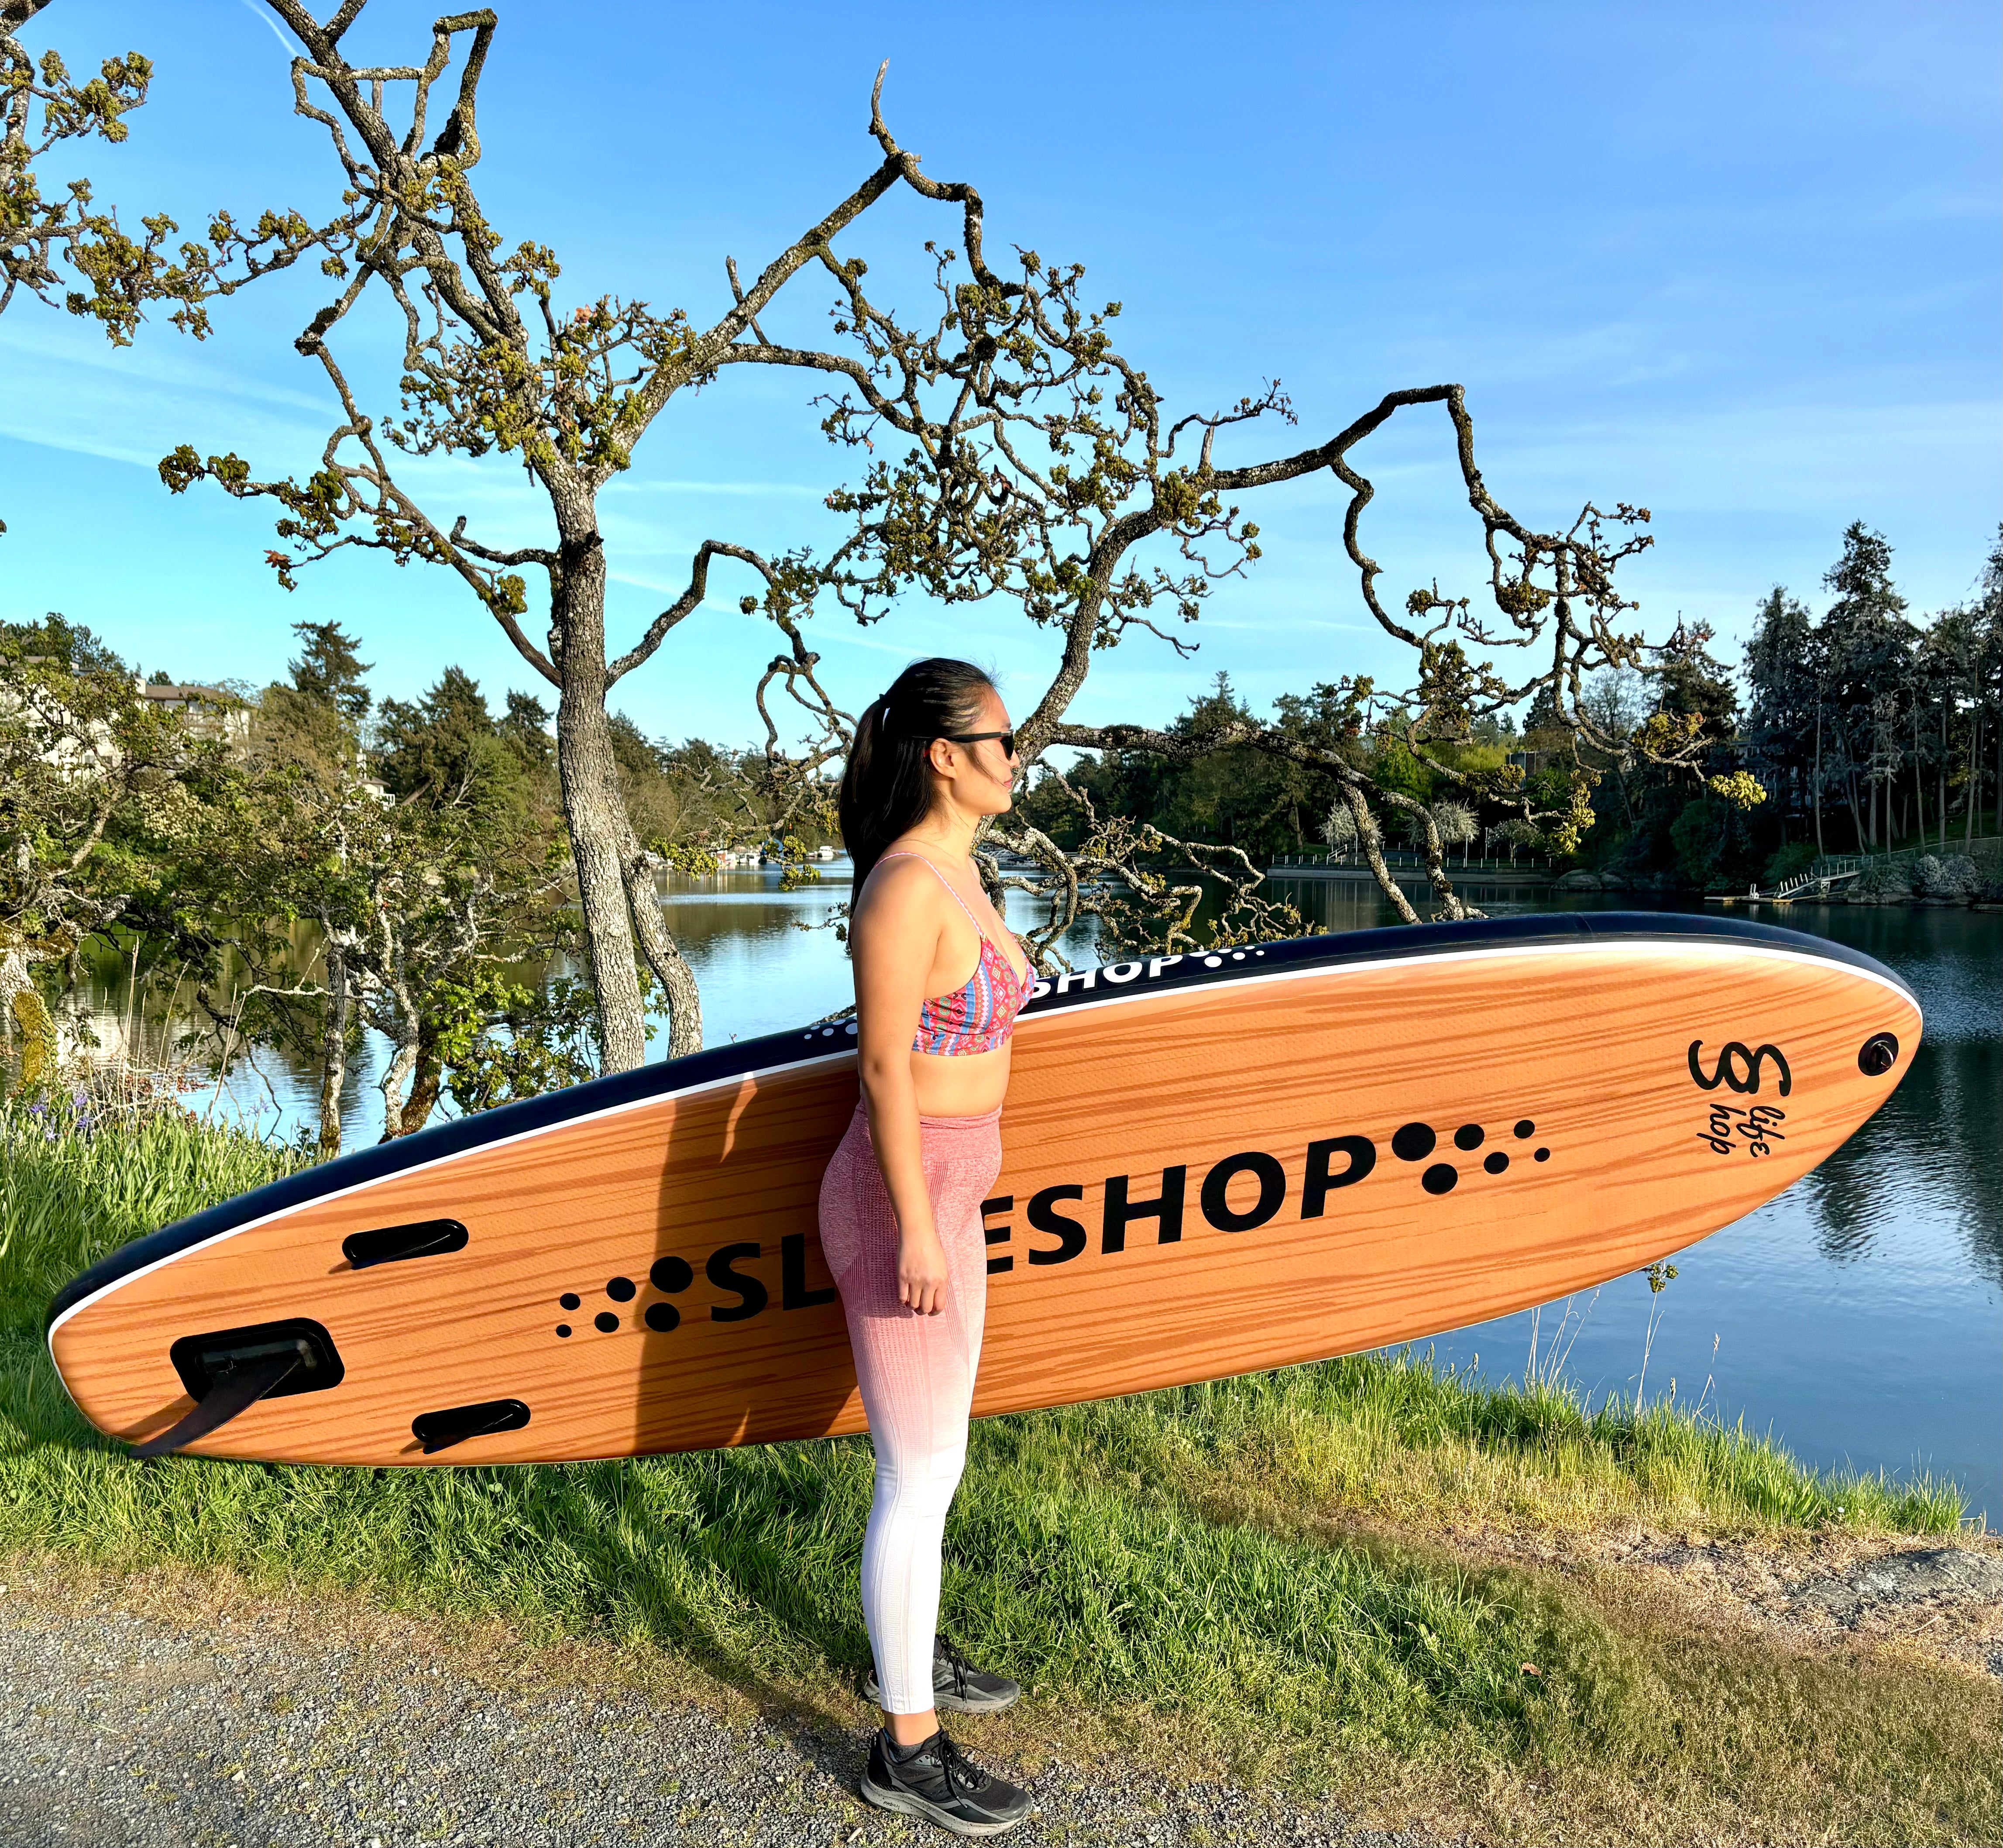 Slifeshop Stand Up Paddle Board SUP Inflatable Wood Snow Mountain 11’